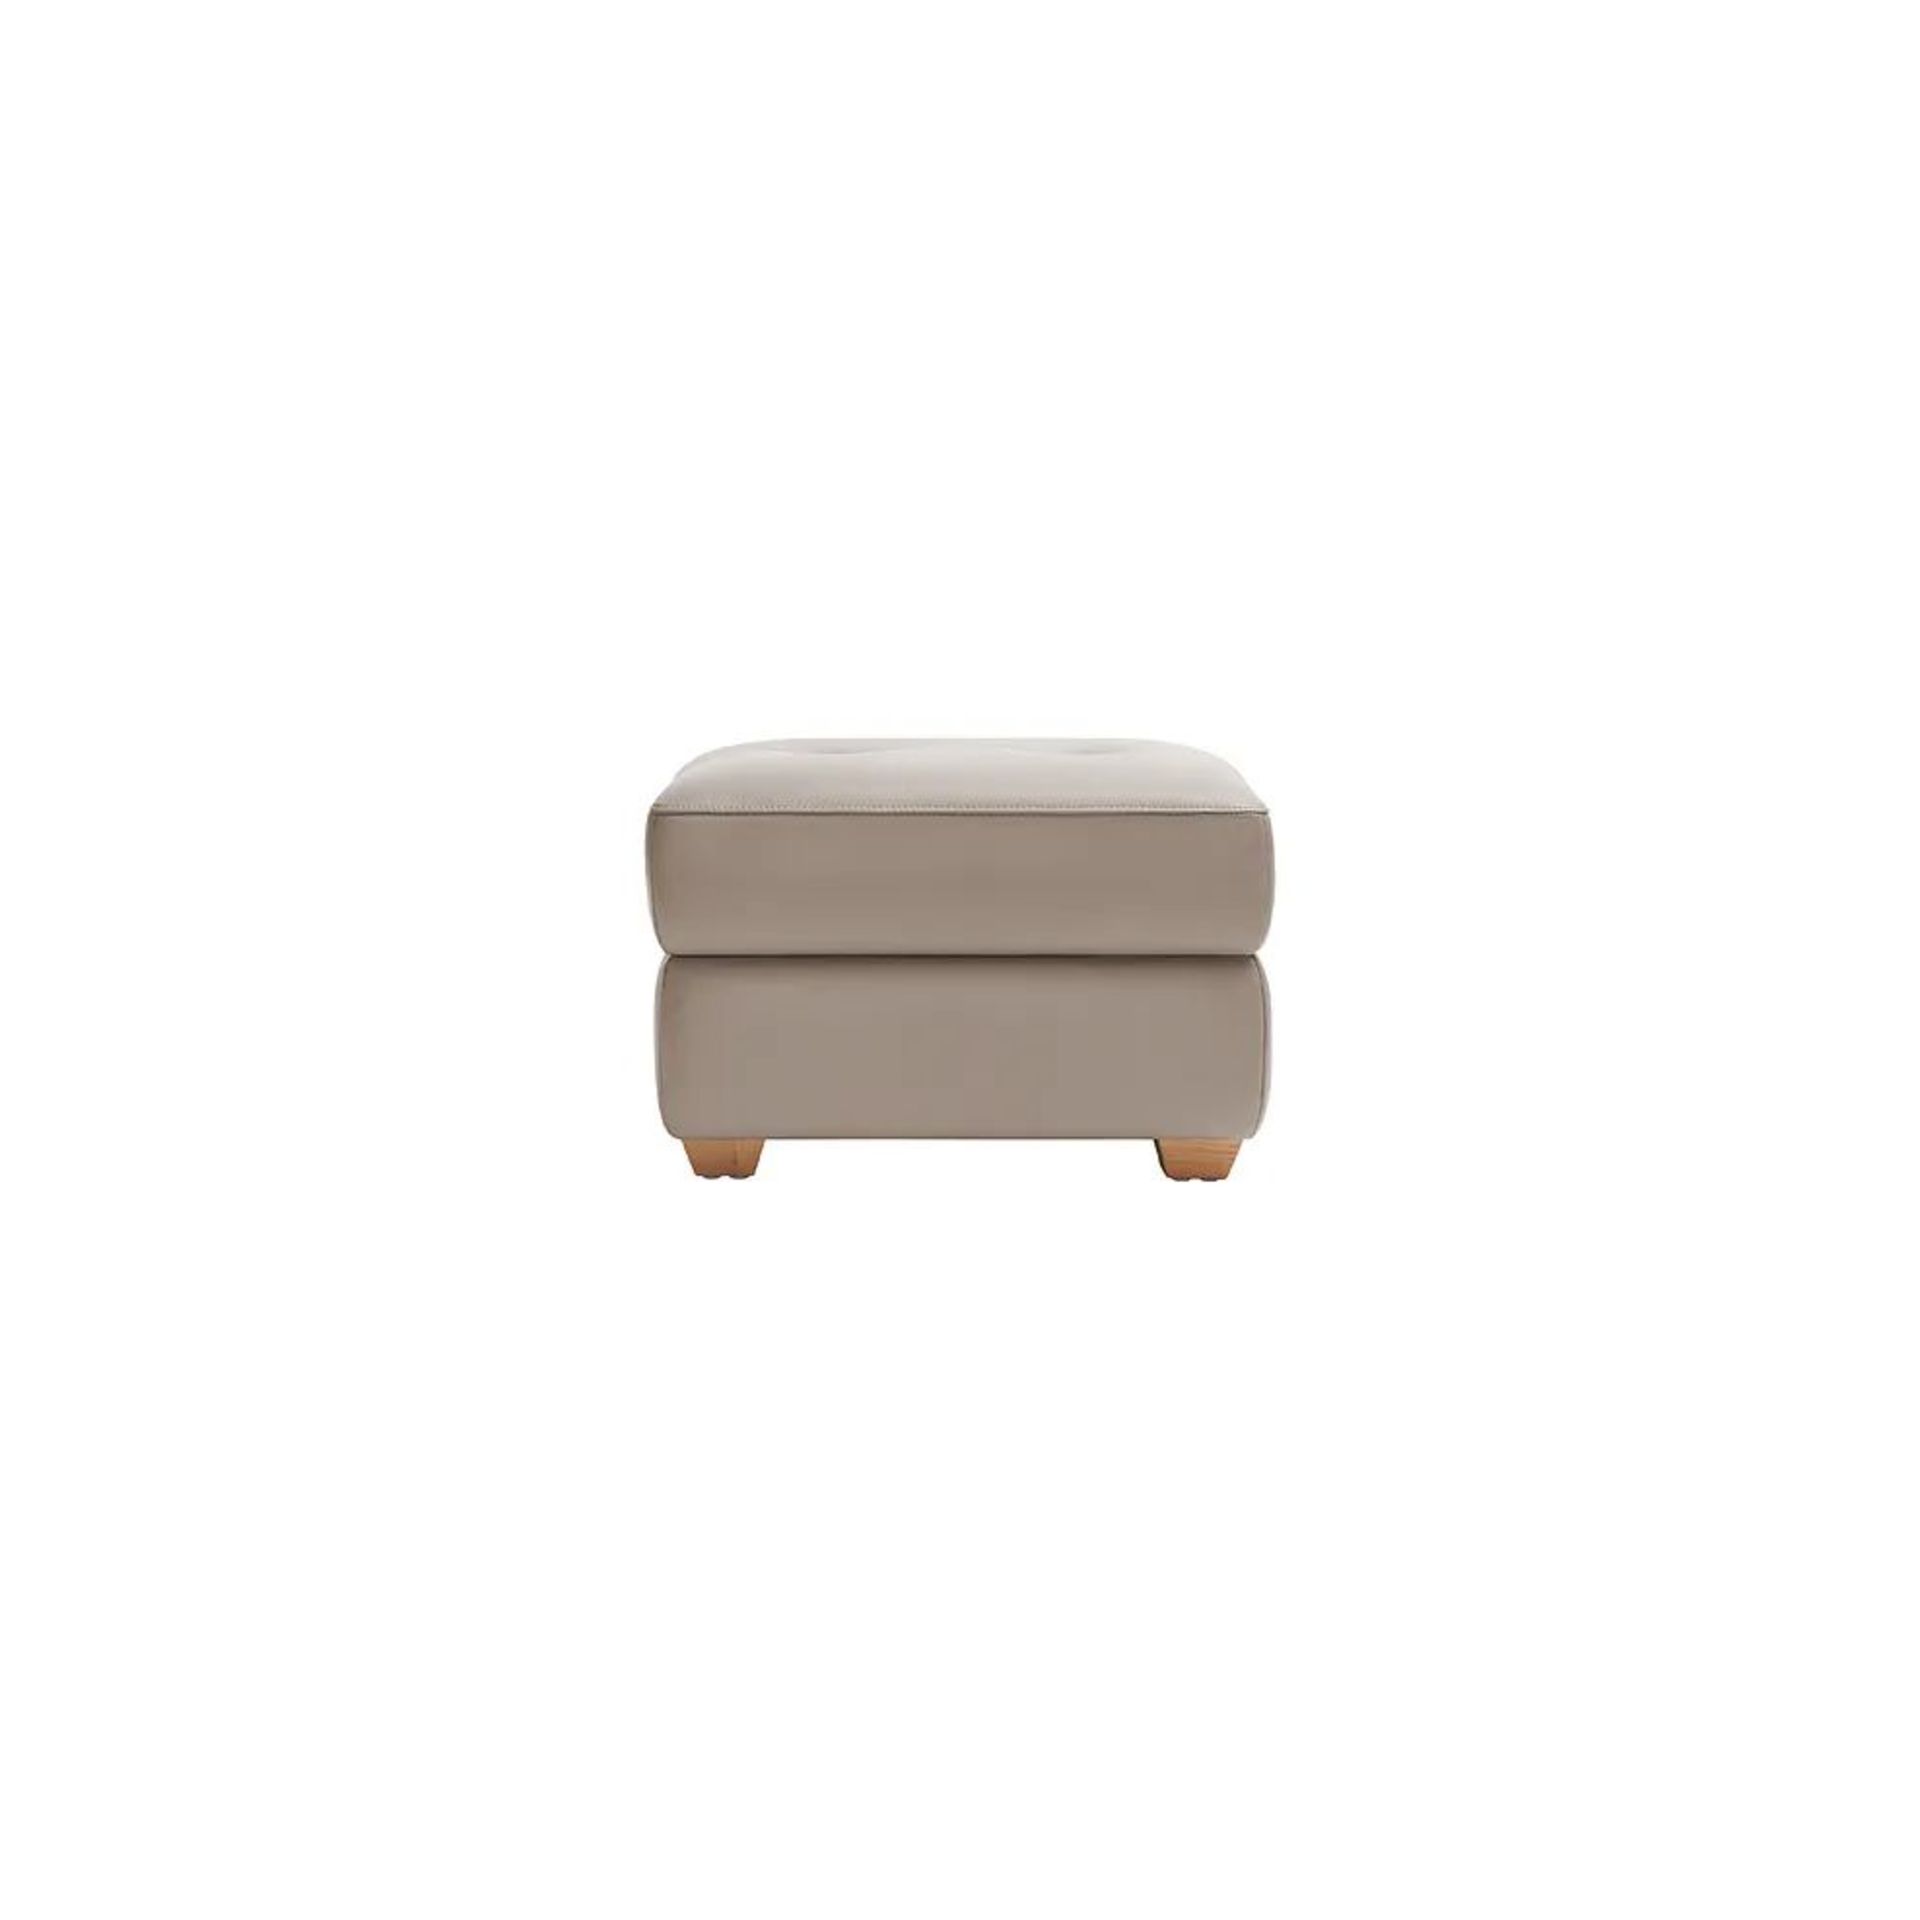 BRAND NEW SAMSON Storage Footstool - STONE LEATHER. RRP £349. Characterised by a simple cuboid - Image 2 of 7